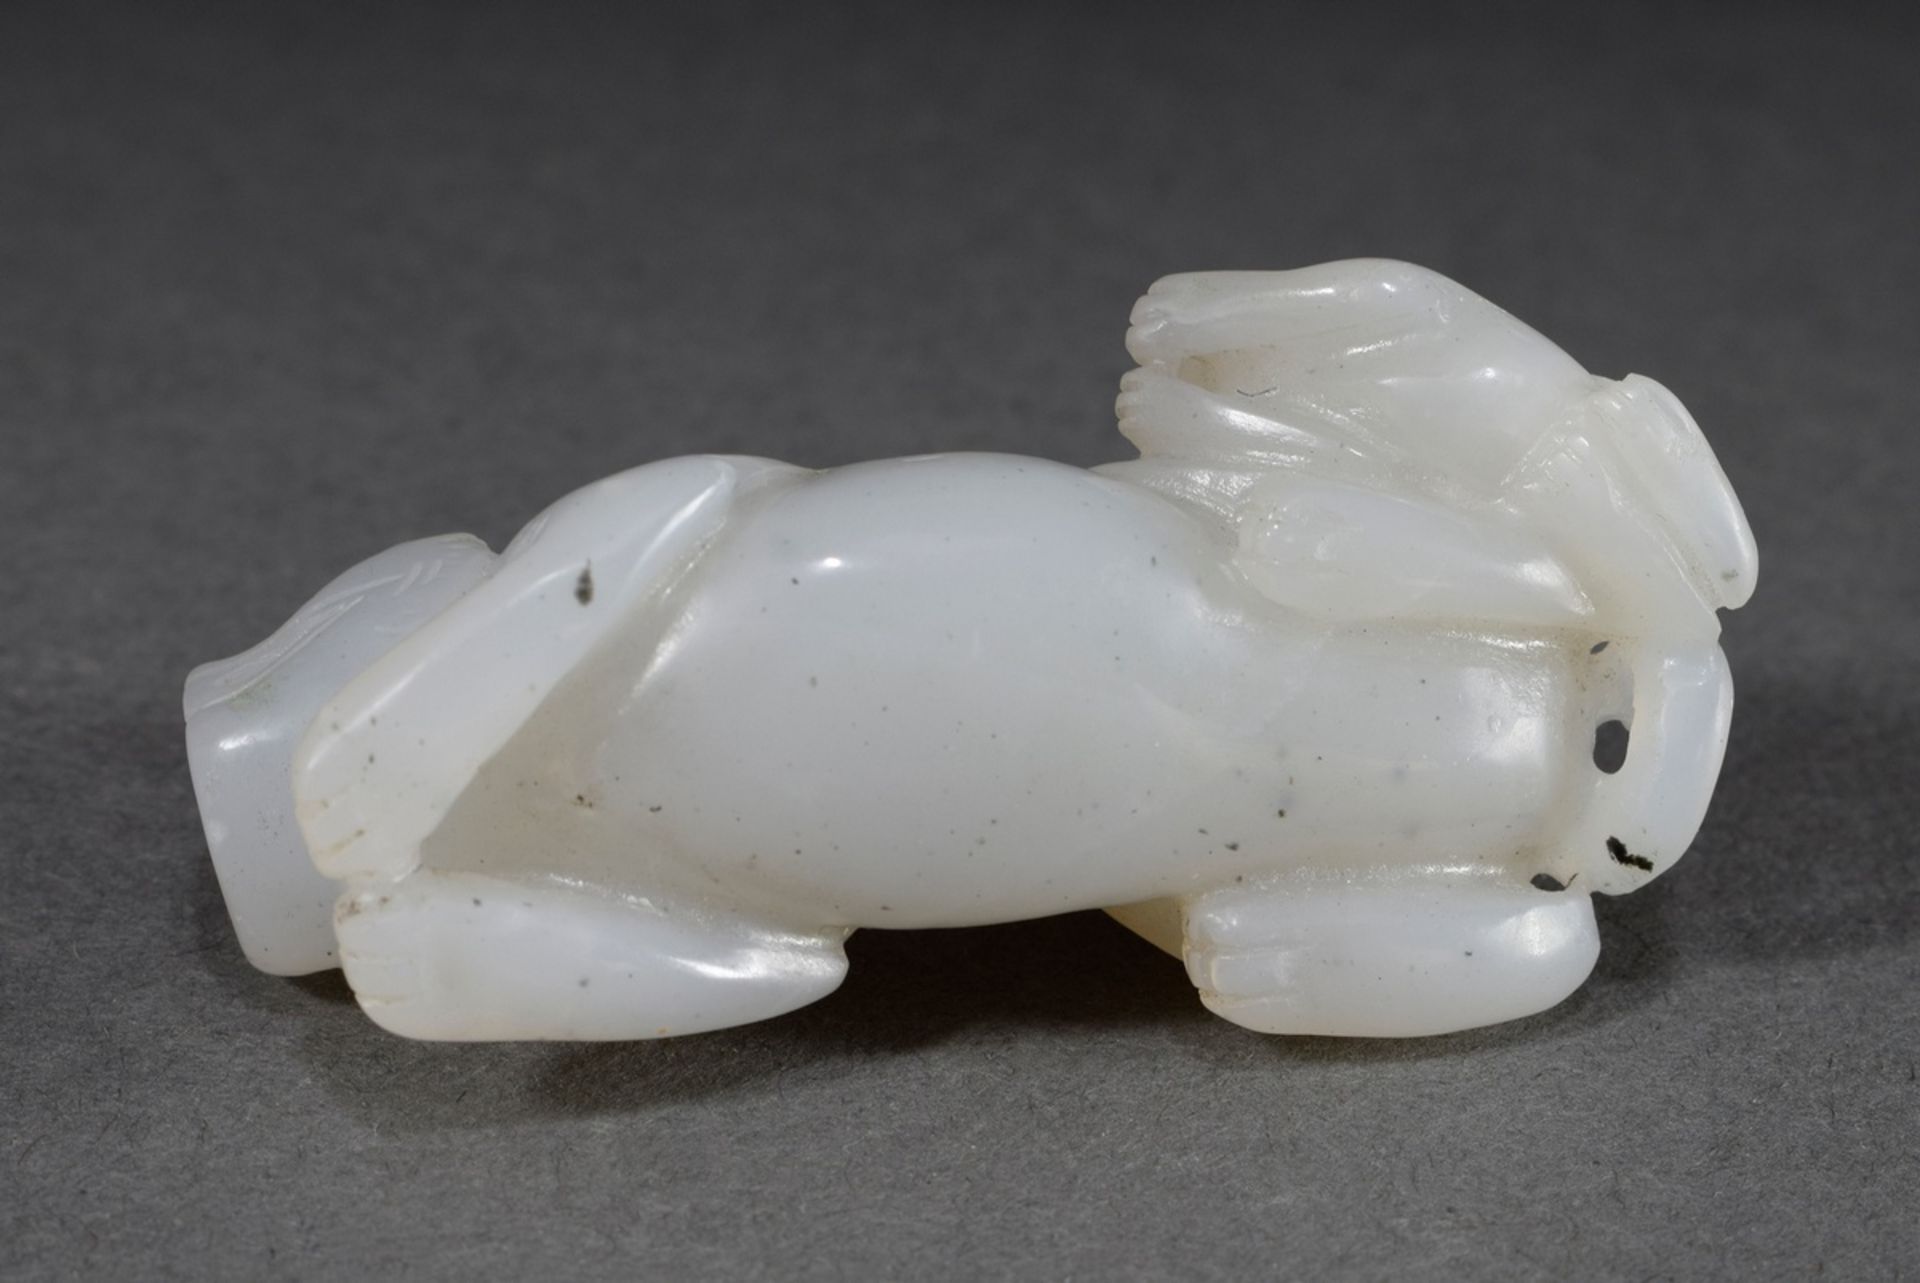 Carved Jade Toggle "Fo Lion and Cub", China, 6x2,5cm - Image 4 of 4